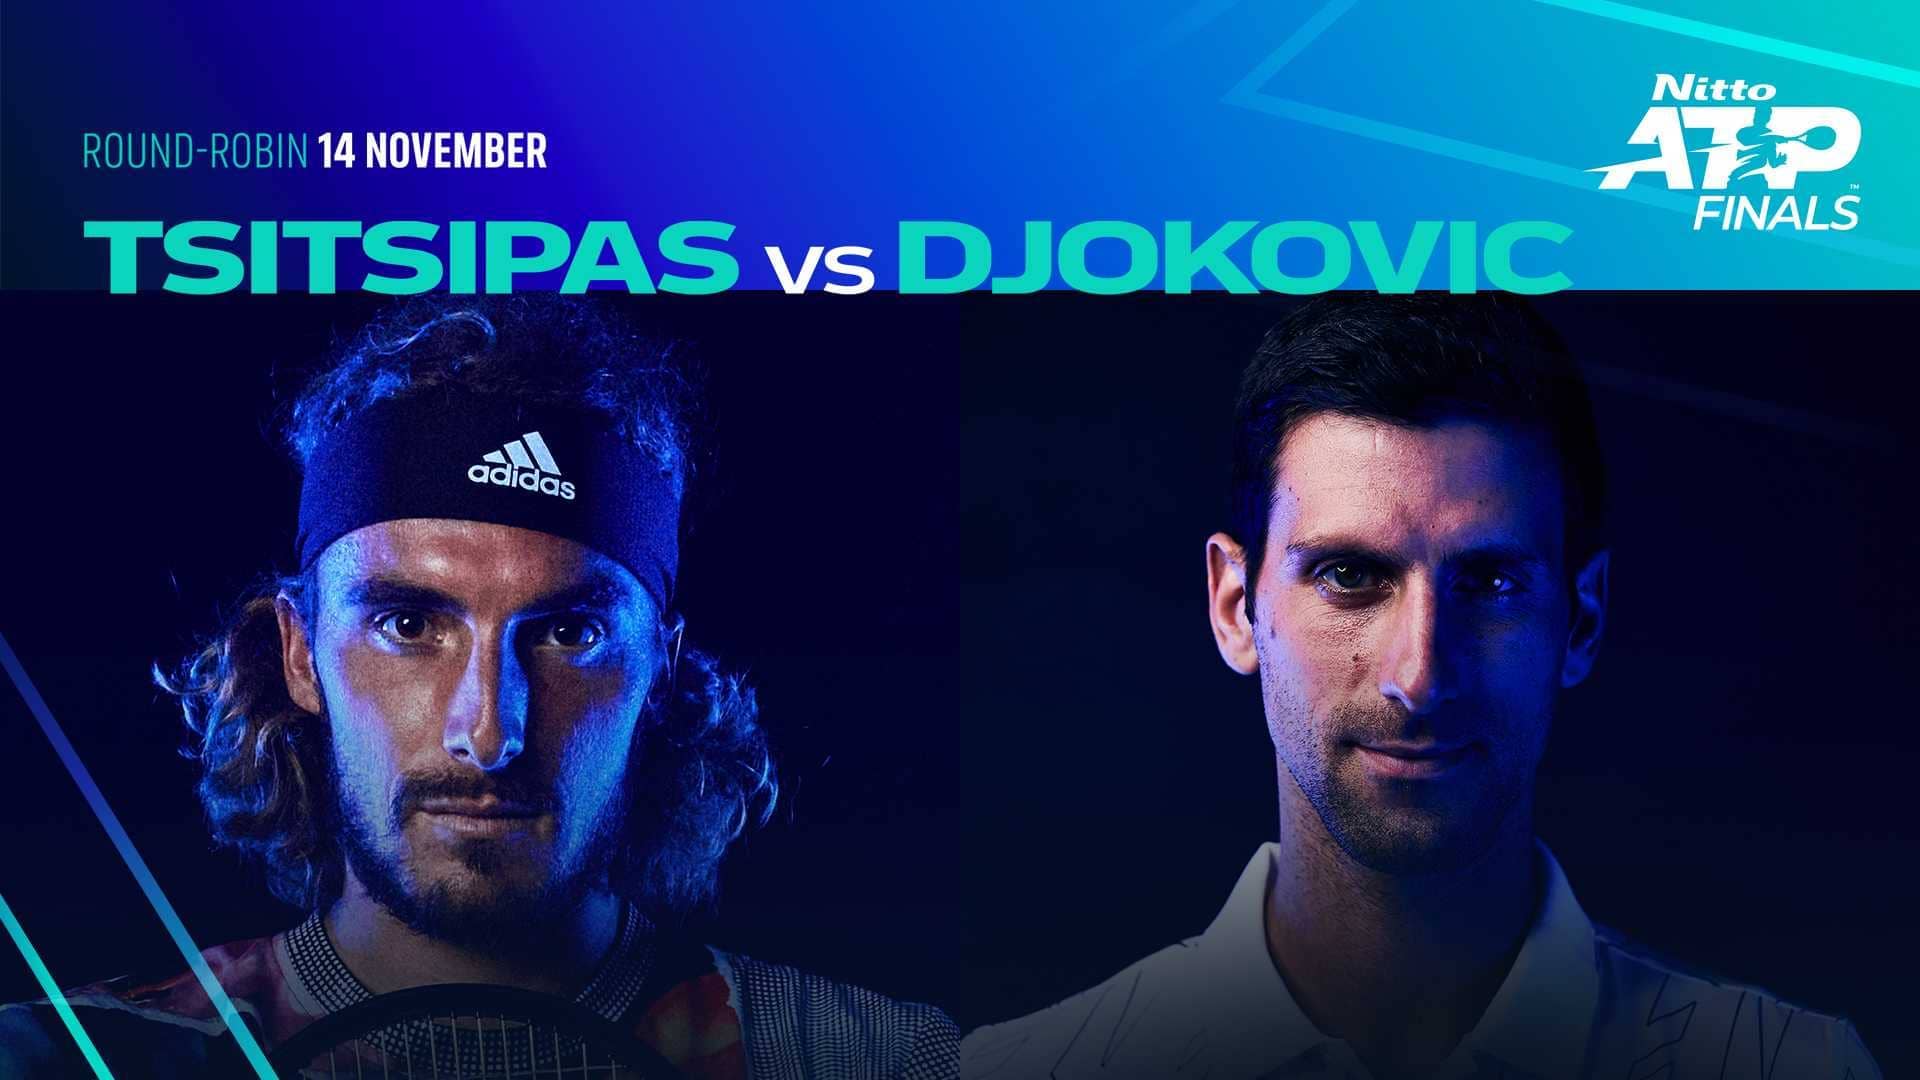 Stefanos Tsitsipas and Novak Djokovic will contest their 12th ATP Head2Head matchup on Day 2 in Turin.